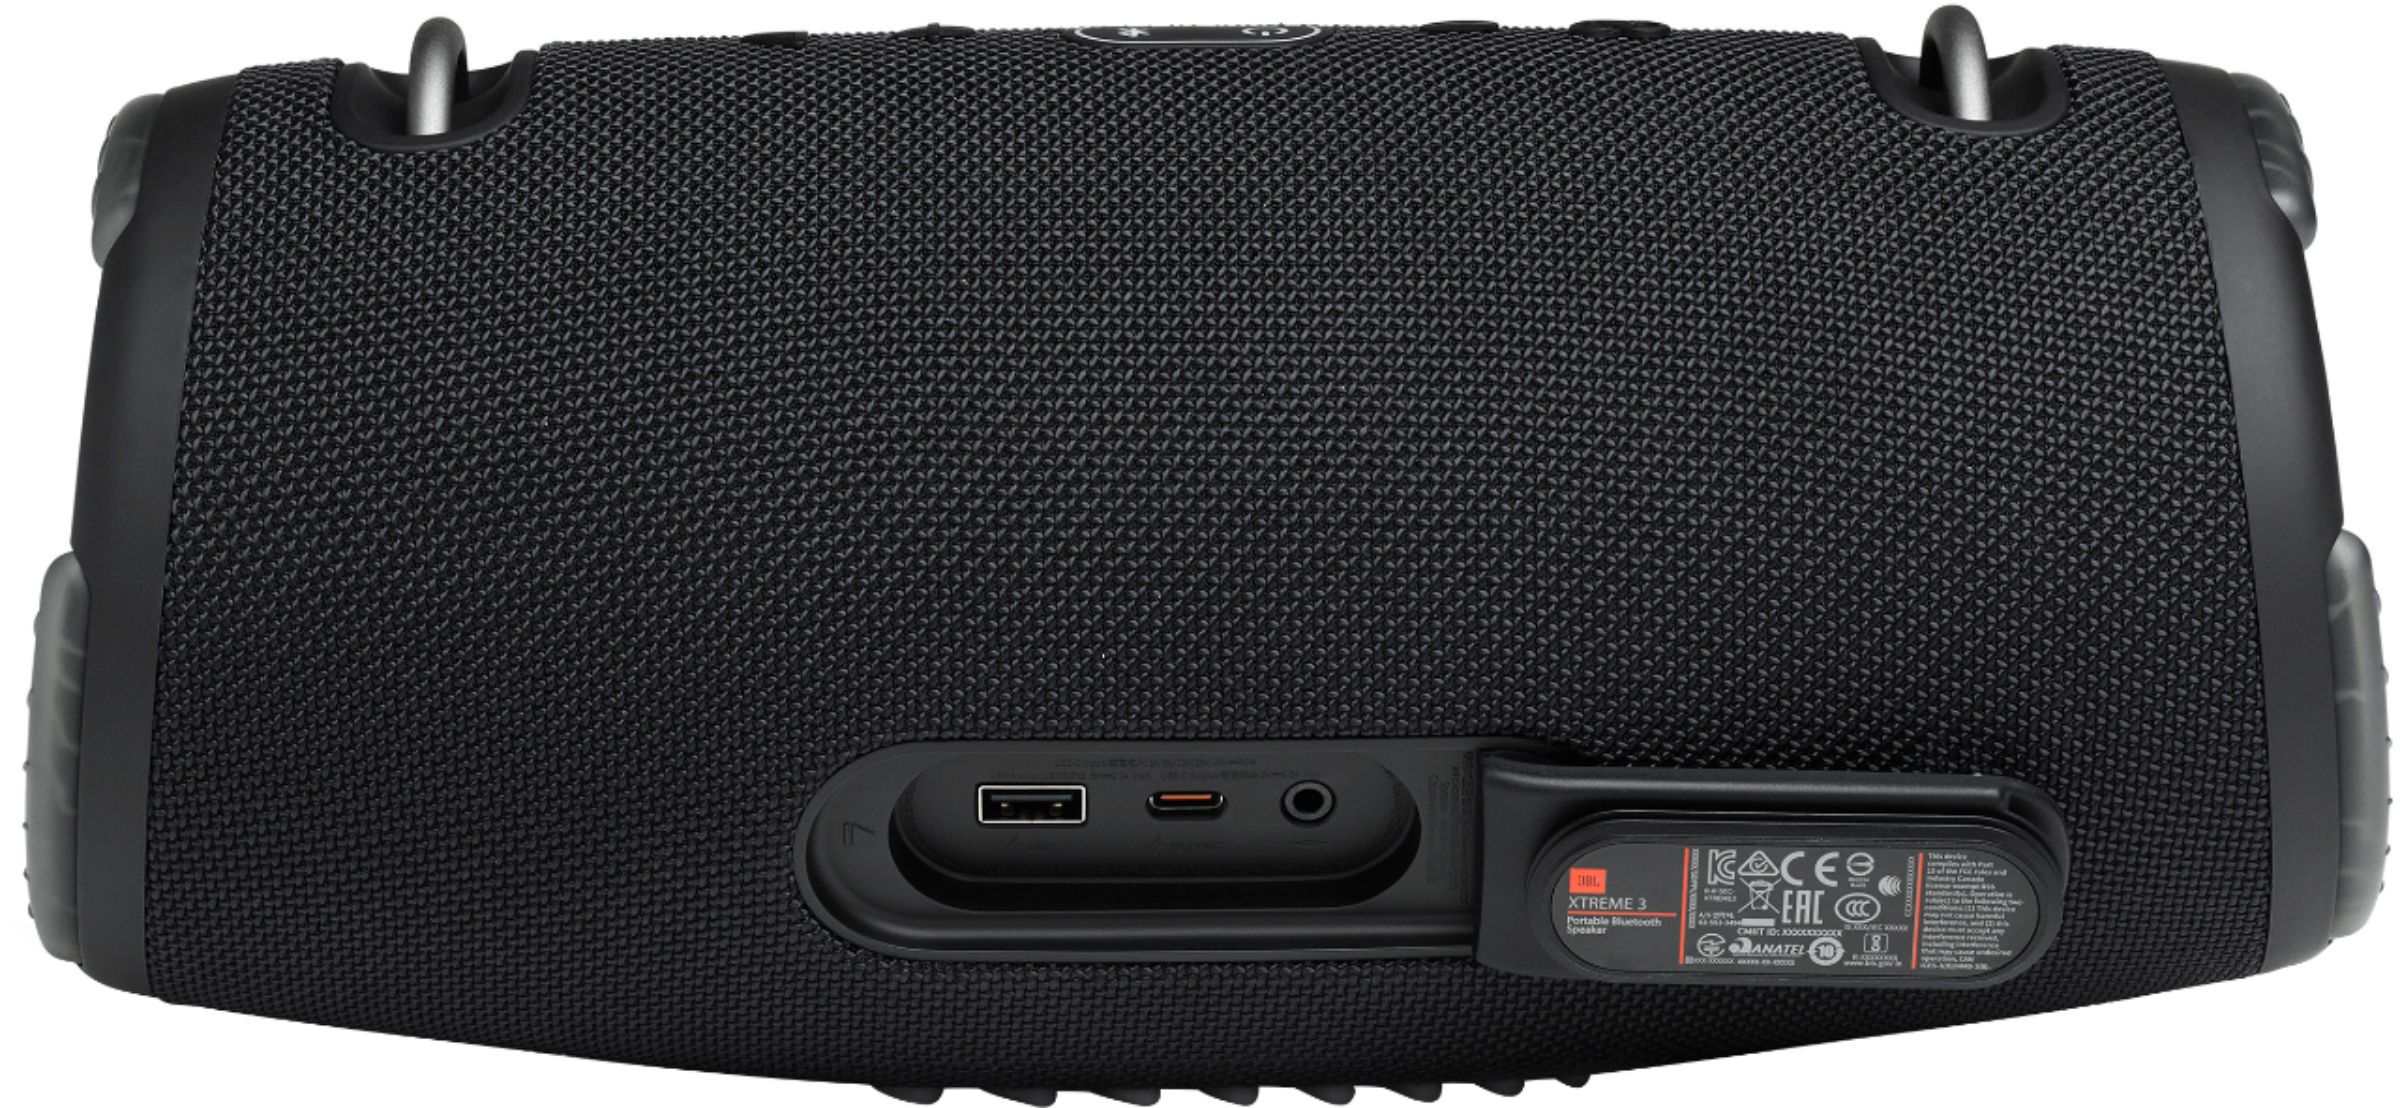 JBL Xtreme 3 - For the party in the park